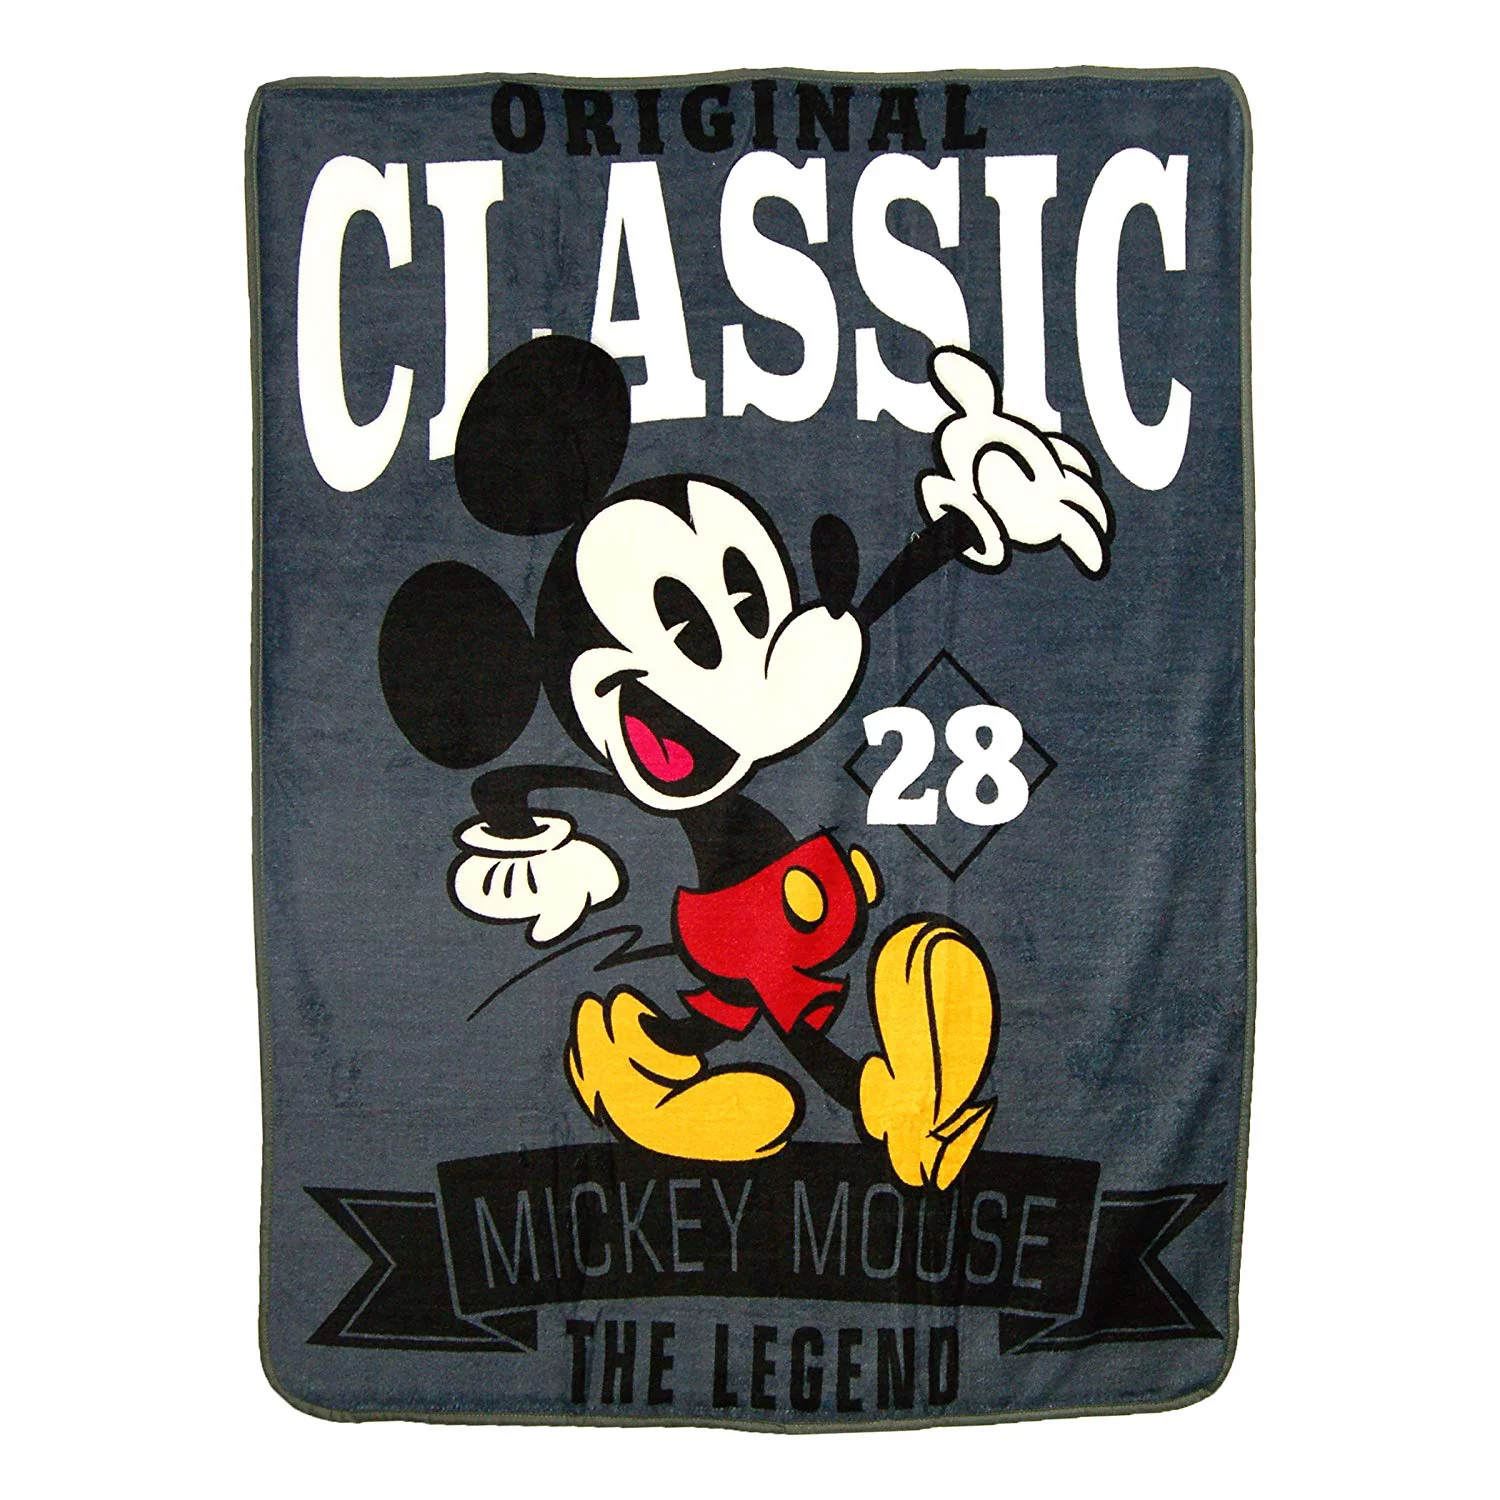 Super Soft Throws - Mickey 90th Anniversary - The Northwest Company